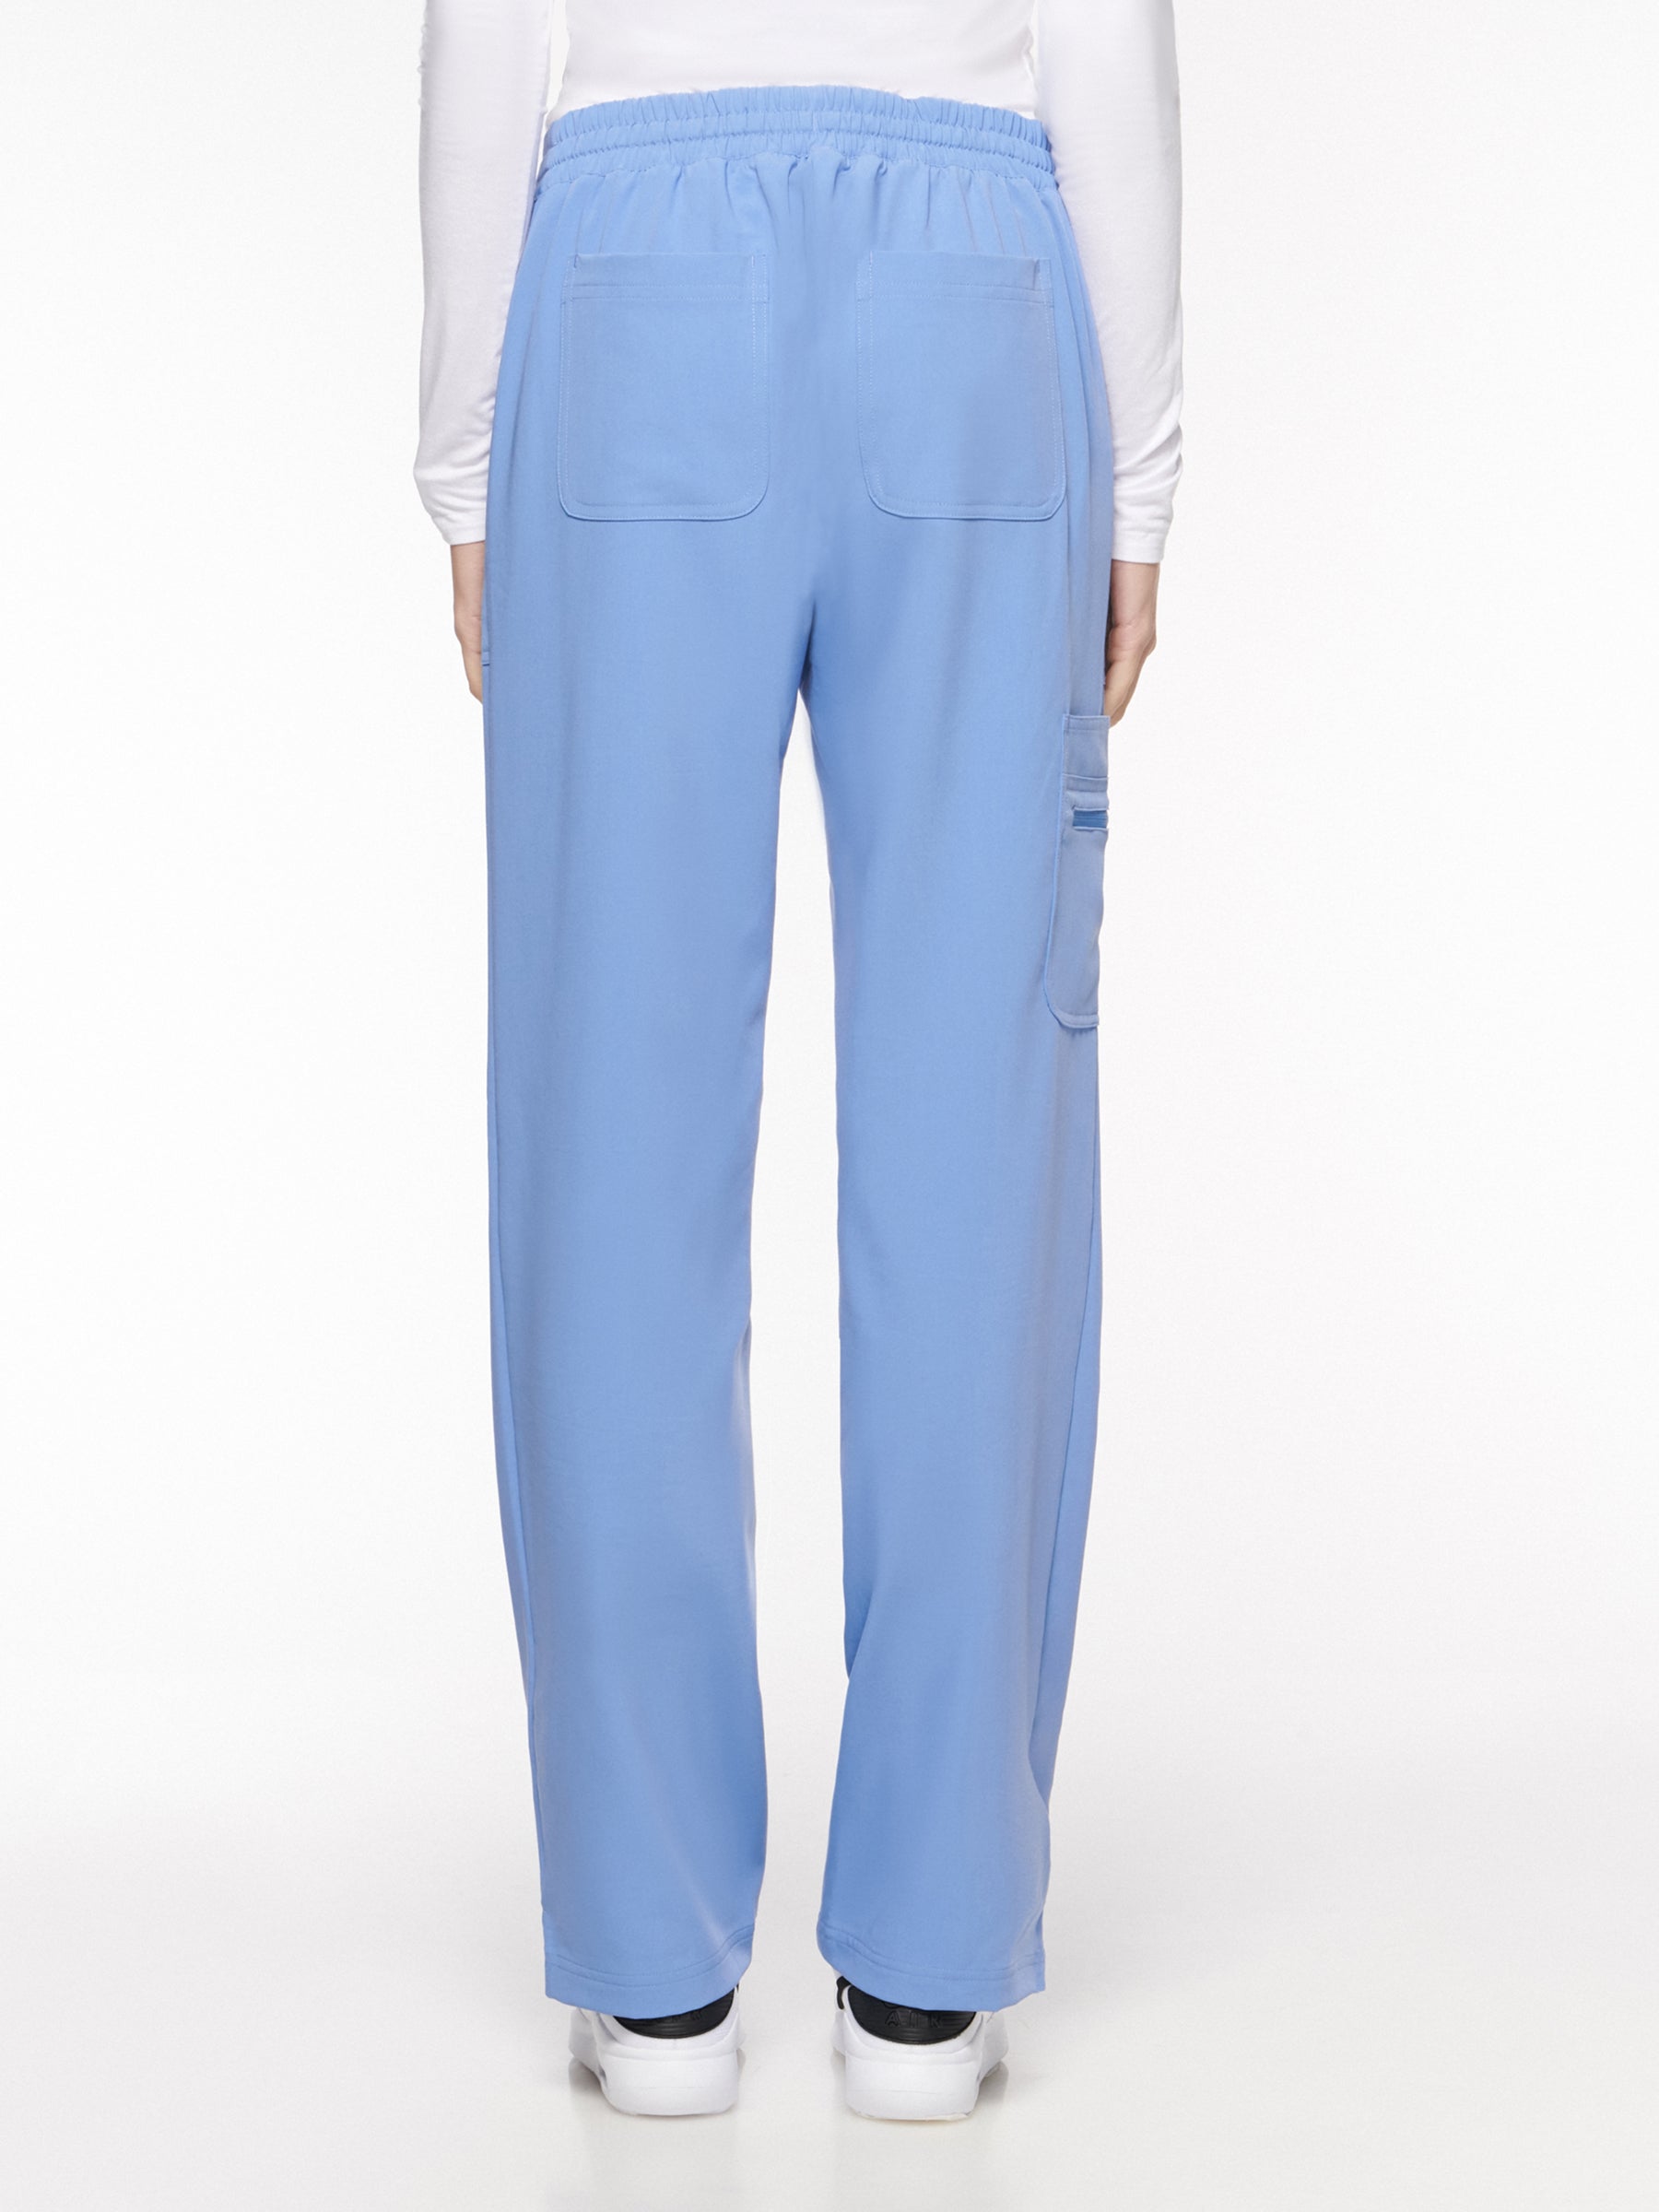 Womens Pant Classic Elastic Pant with 7 Pockets – Regular (93001R) - A Plus Medical Scrubs